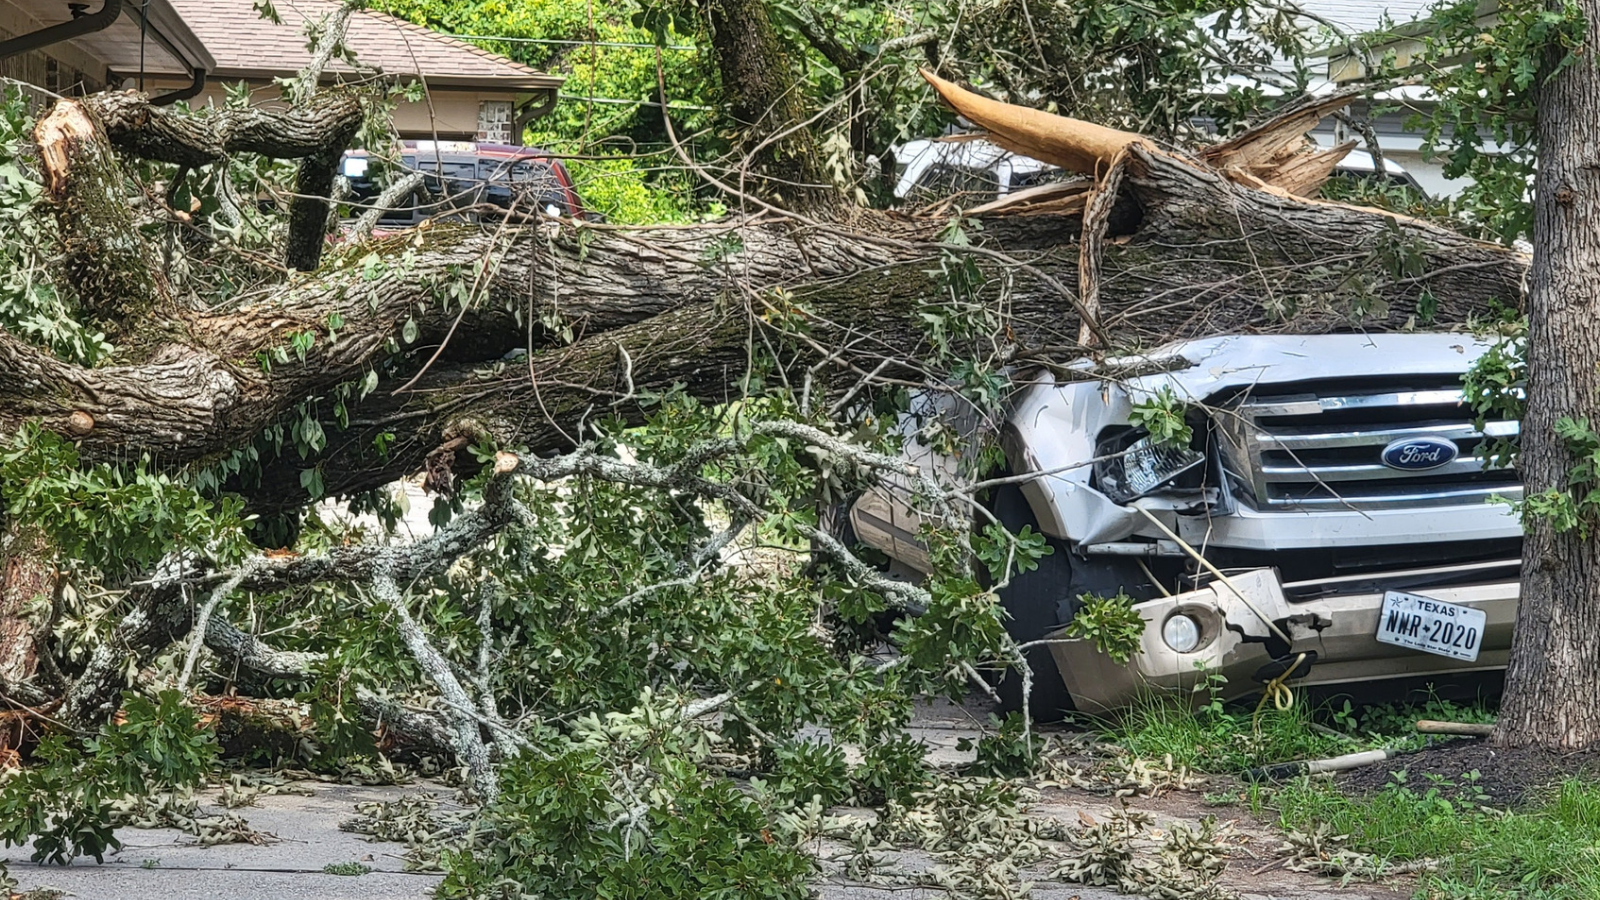 Fallen Tree on a Car During a Wind Storm in The Houston Area